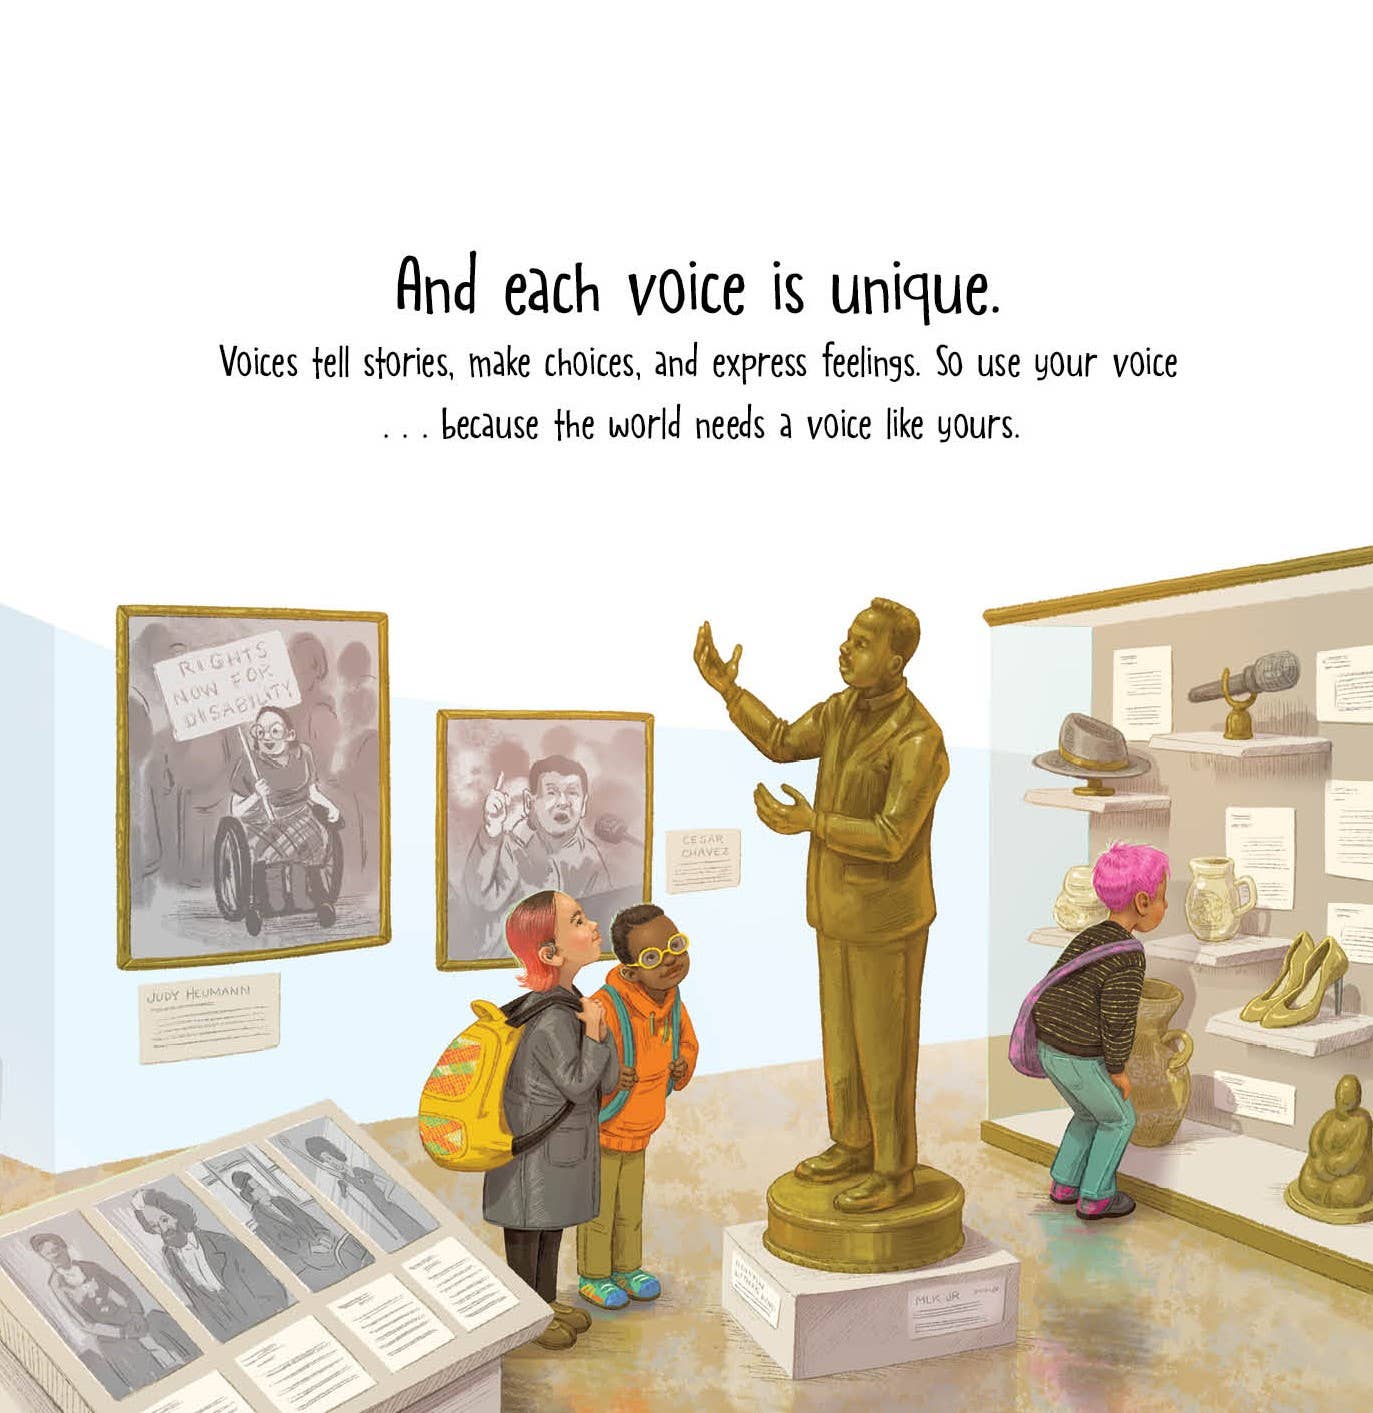 A Voice Like Yours:  A children's picture book